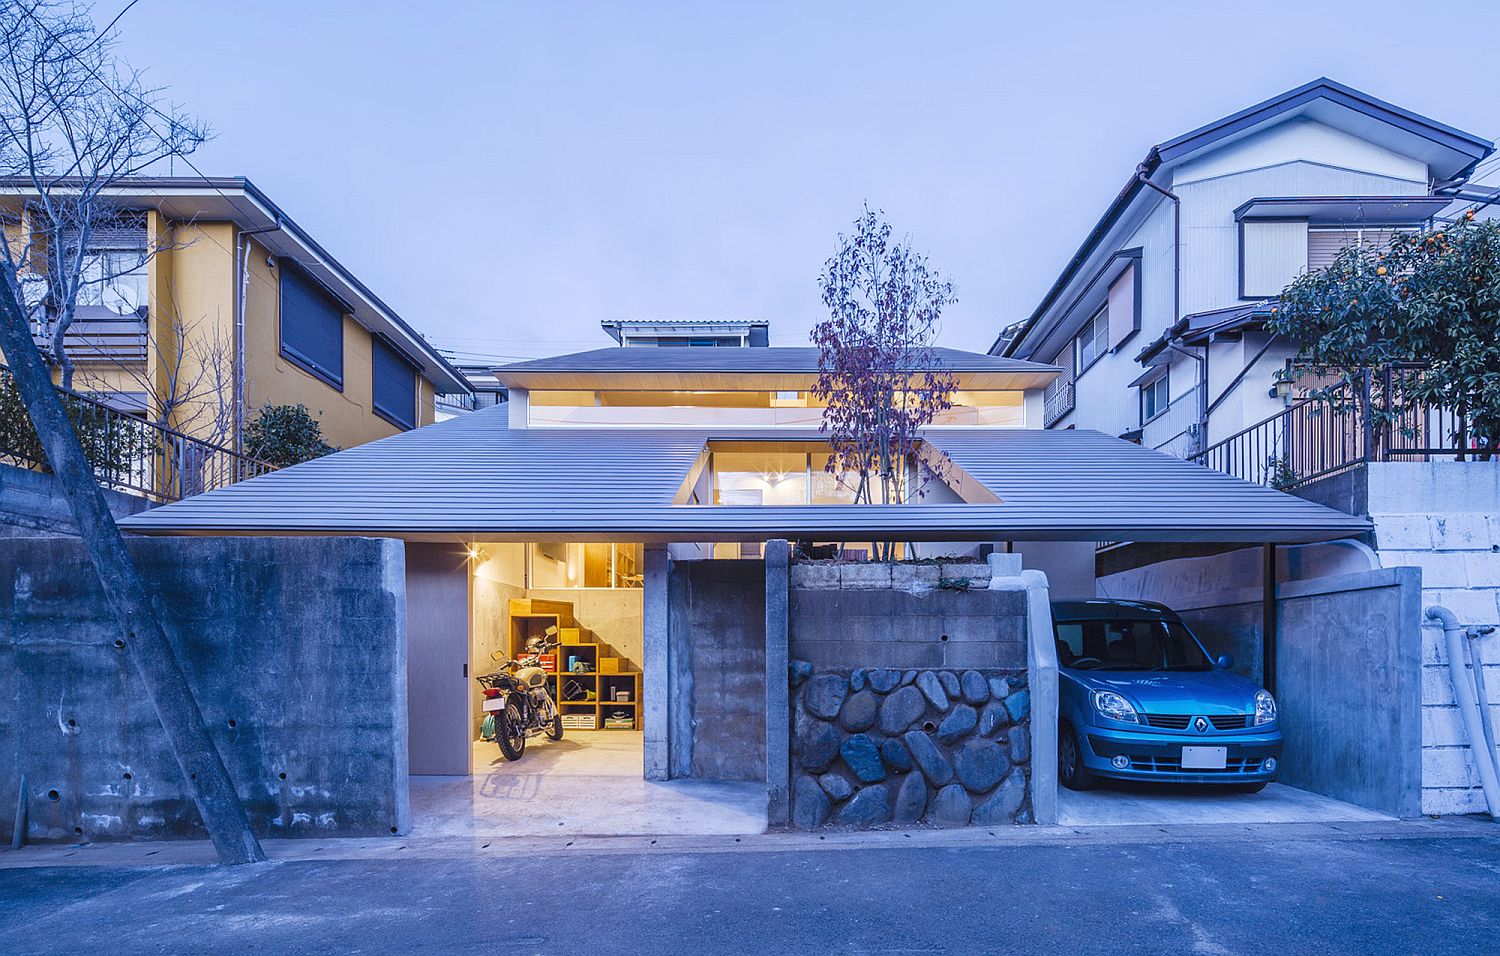 Chic Japanese House Integrates Old Retaining Wall With Woodsy Slanted Roof